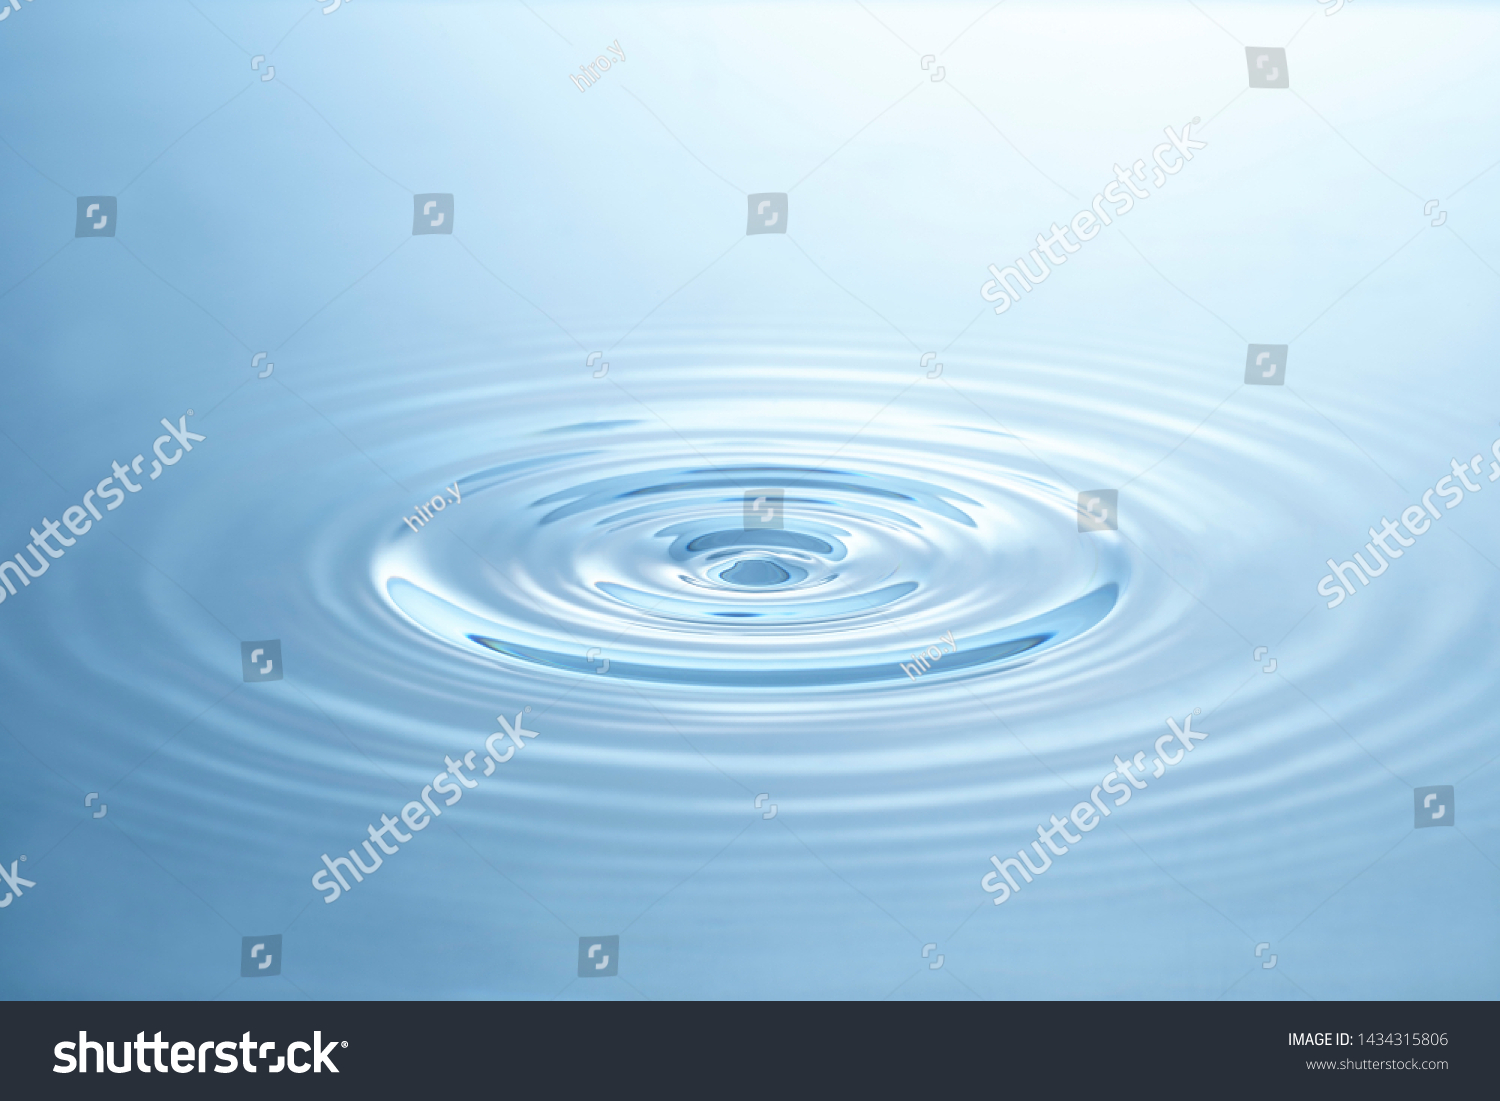 various types of water ripples #1434315806